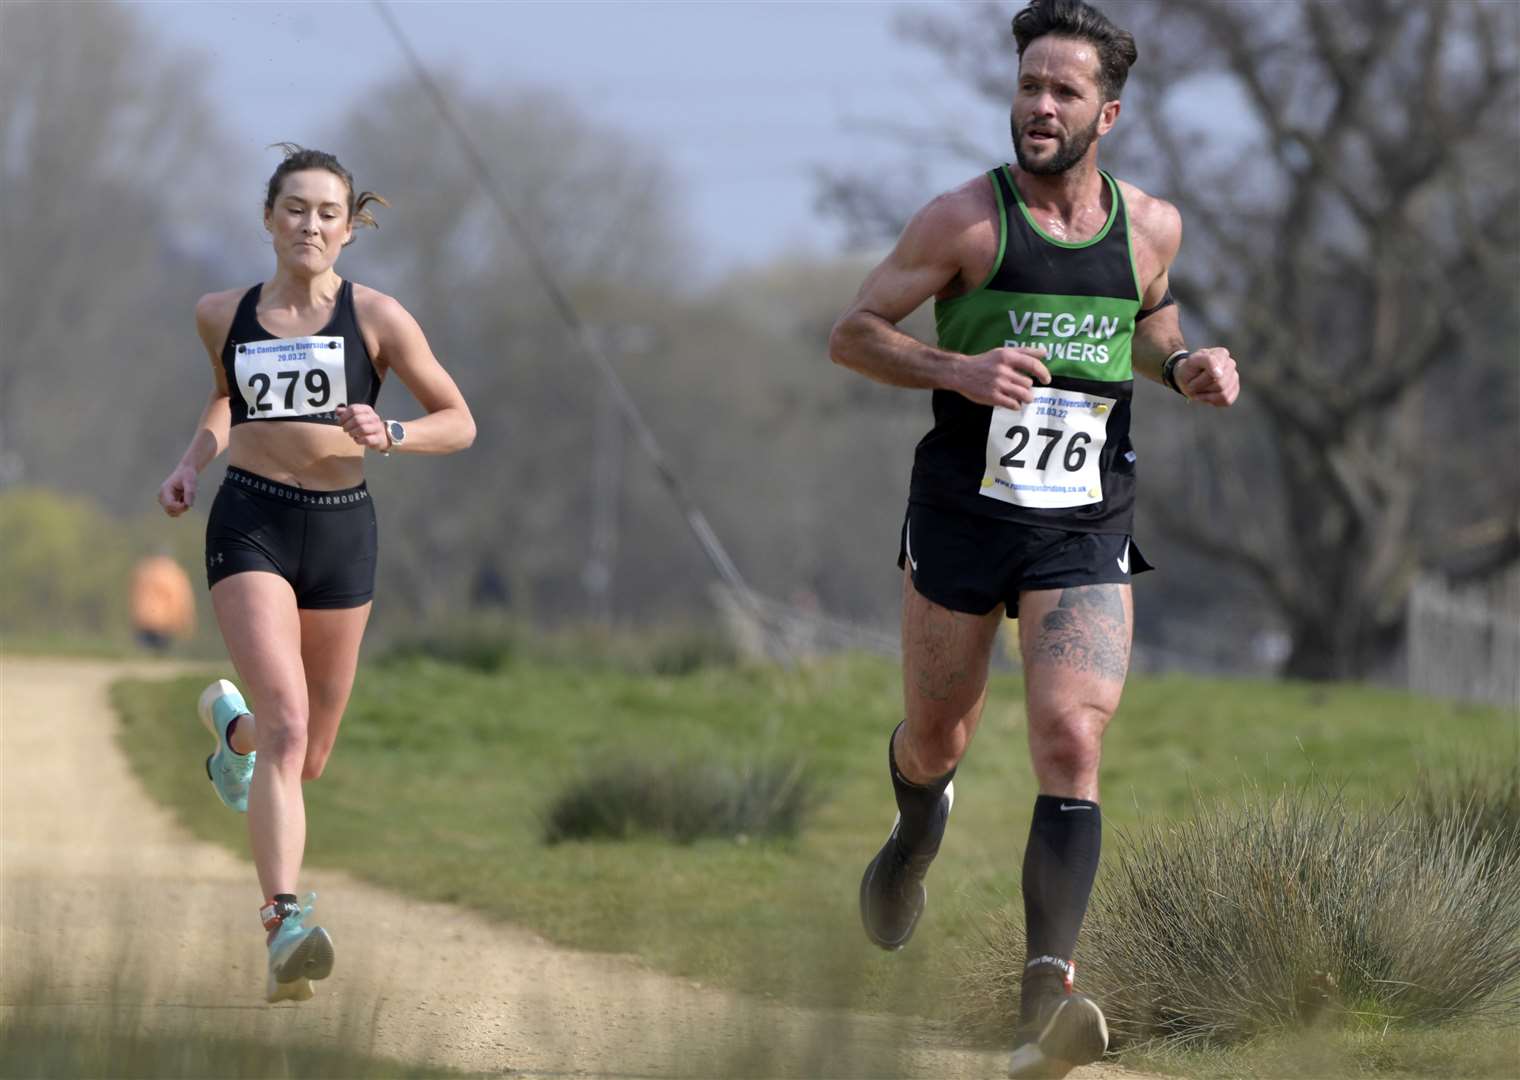 Thanet Road Runners member Abigail Cardwell, who was the first female to finish, closes in on Dean Evans who finished 11th. Picture: Barry Goodwin